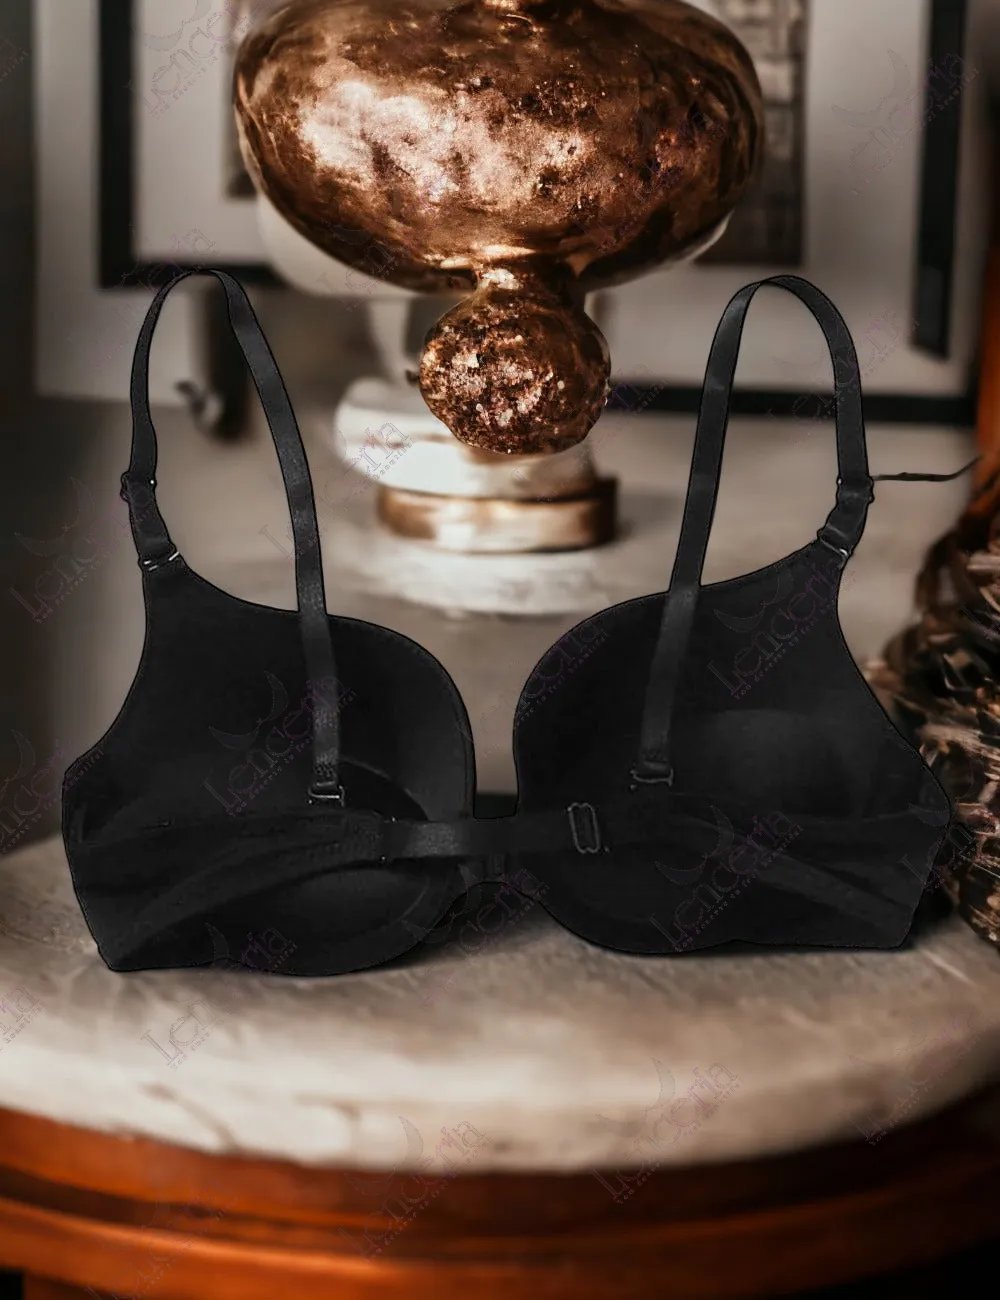 Cheriee everyday essentials lightly padded black bra - extremely